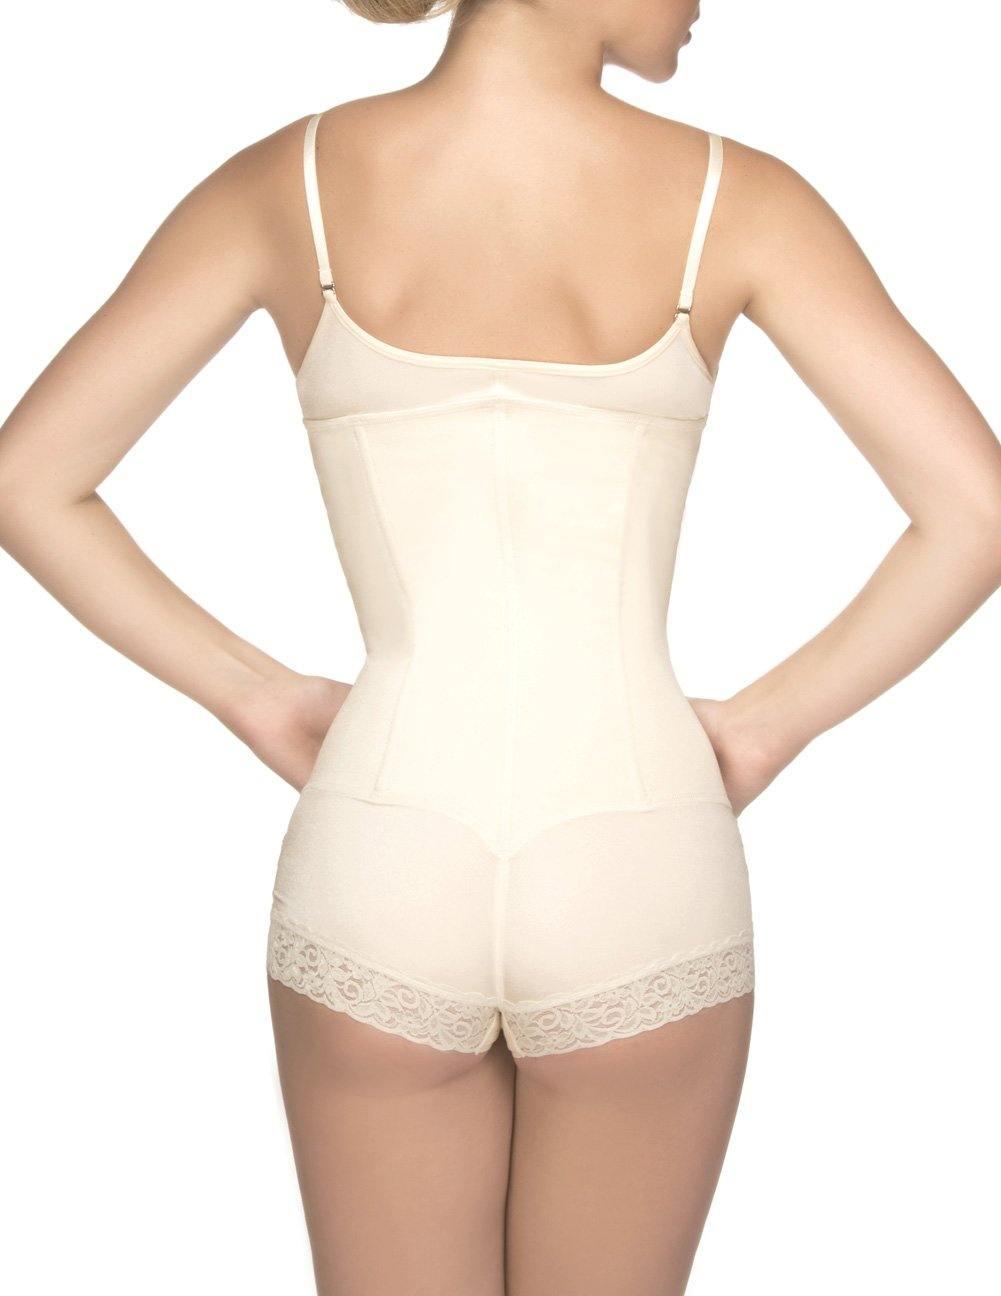 image of product,Megane Open Bust Bodysuit w/ Lace Trim - SEXYEONE 